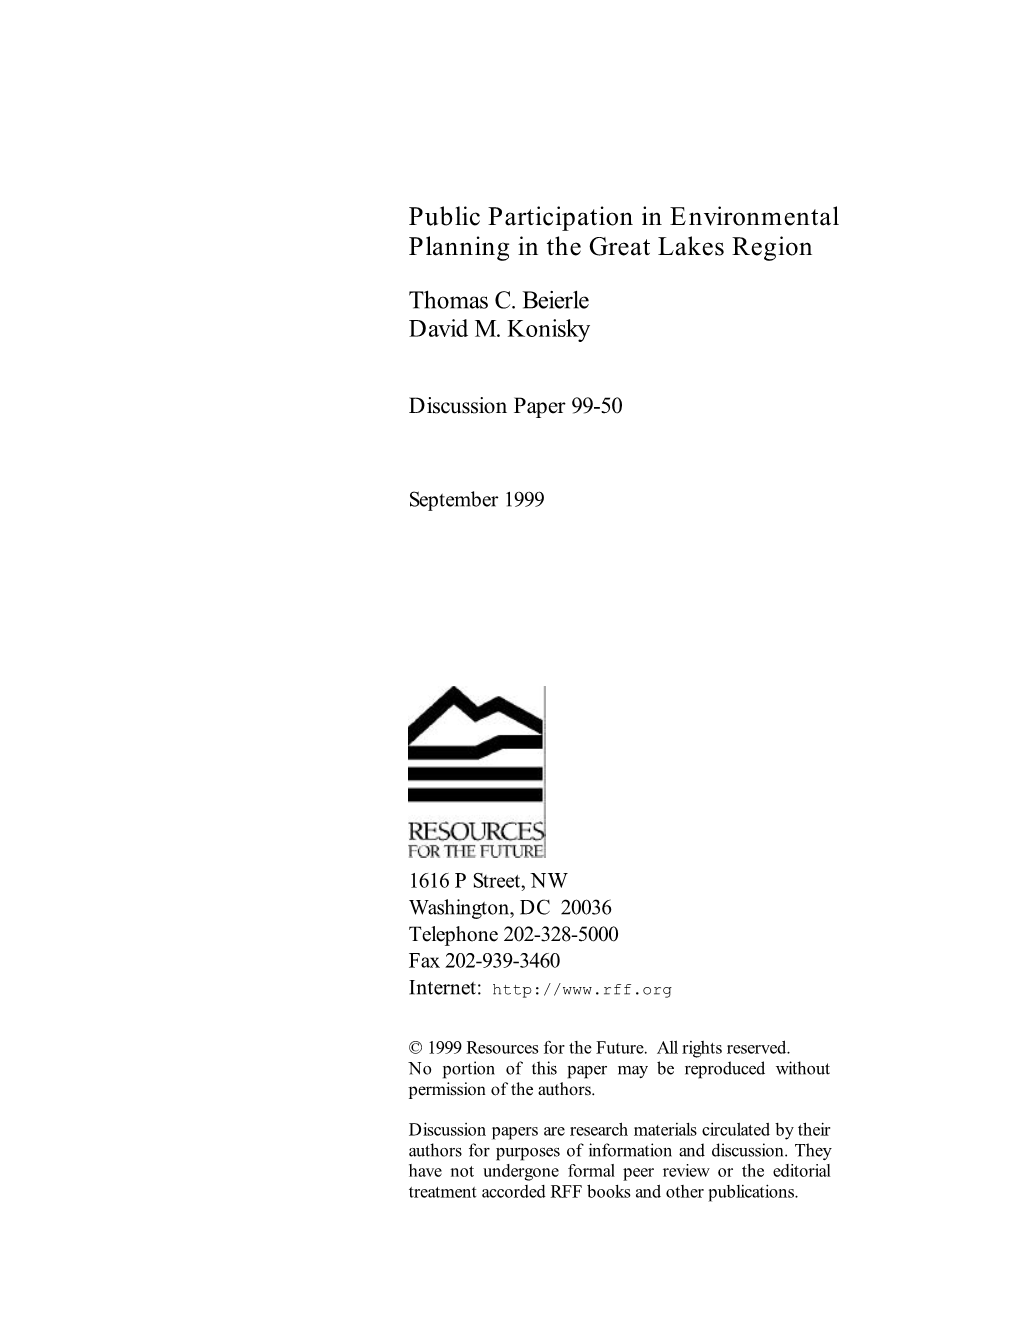 Public Participation in Environmental Planning in the Great Lakes Region